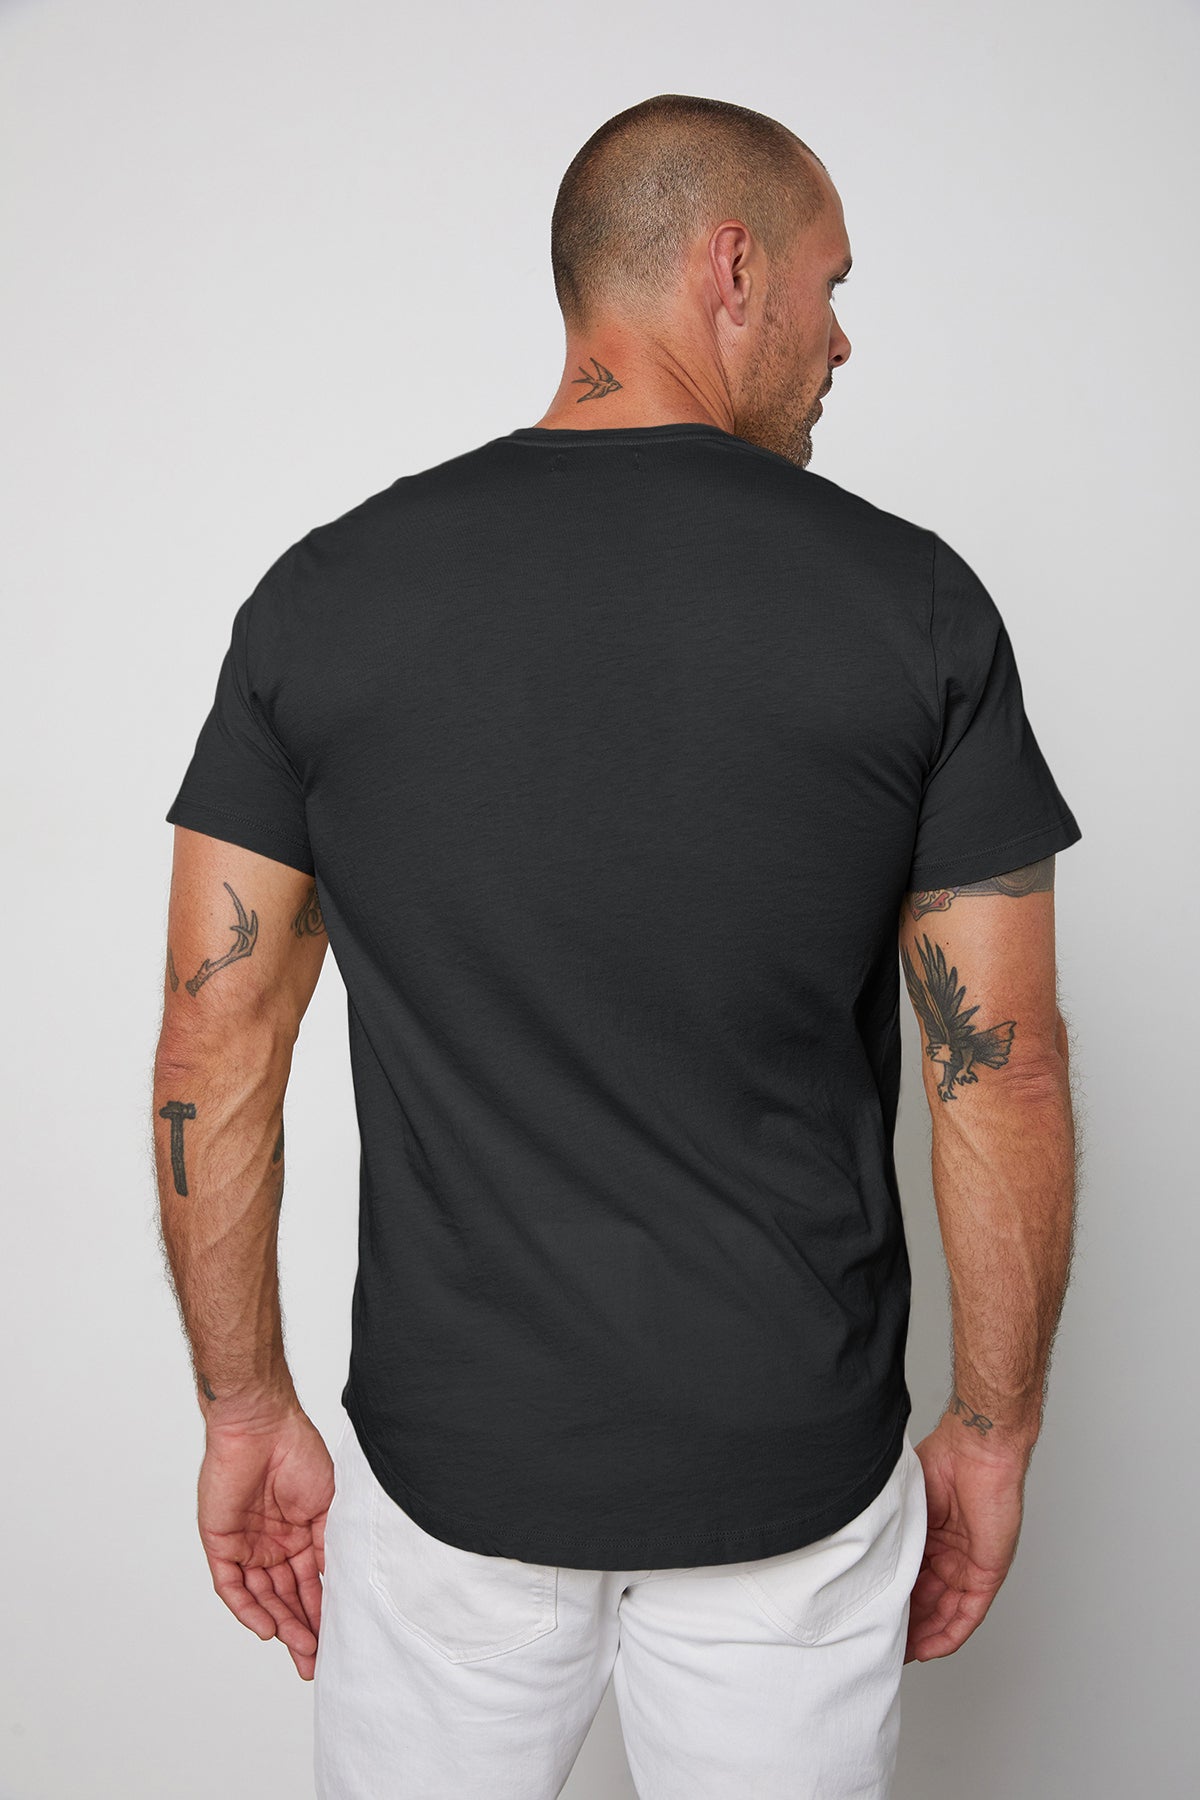 Man standing with his back to the camera, wearing a black Velvet by Graham & Spencer Fulton Henley and white pants, displaying tattoos on his arms.-24559747465409